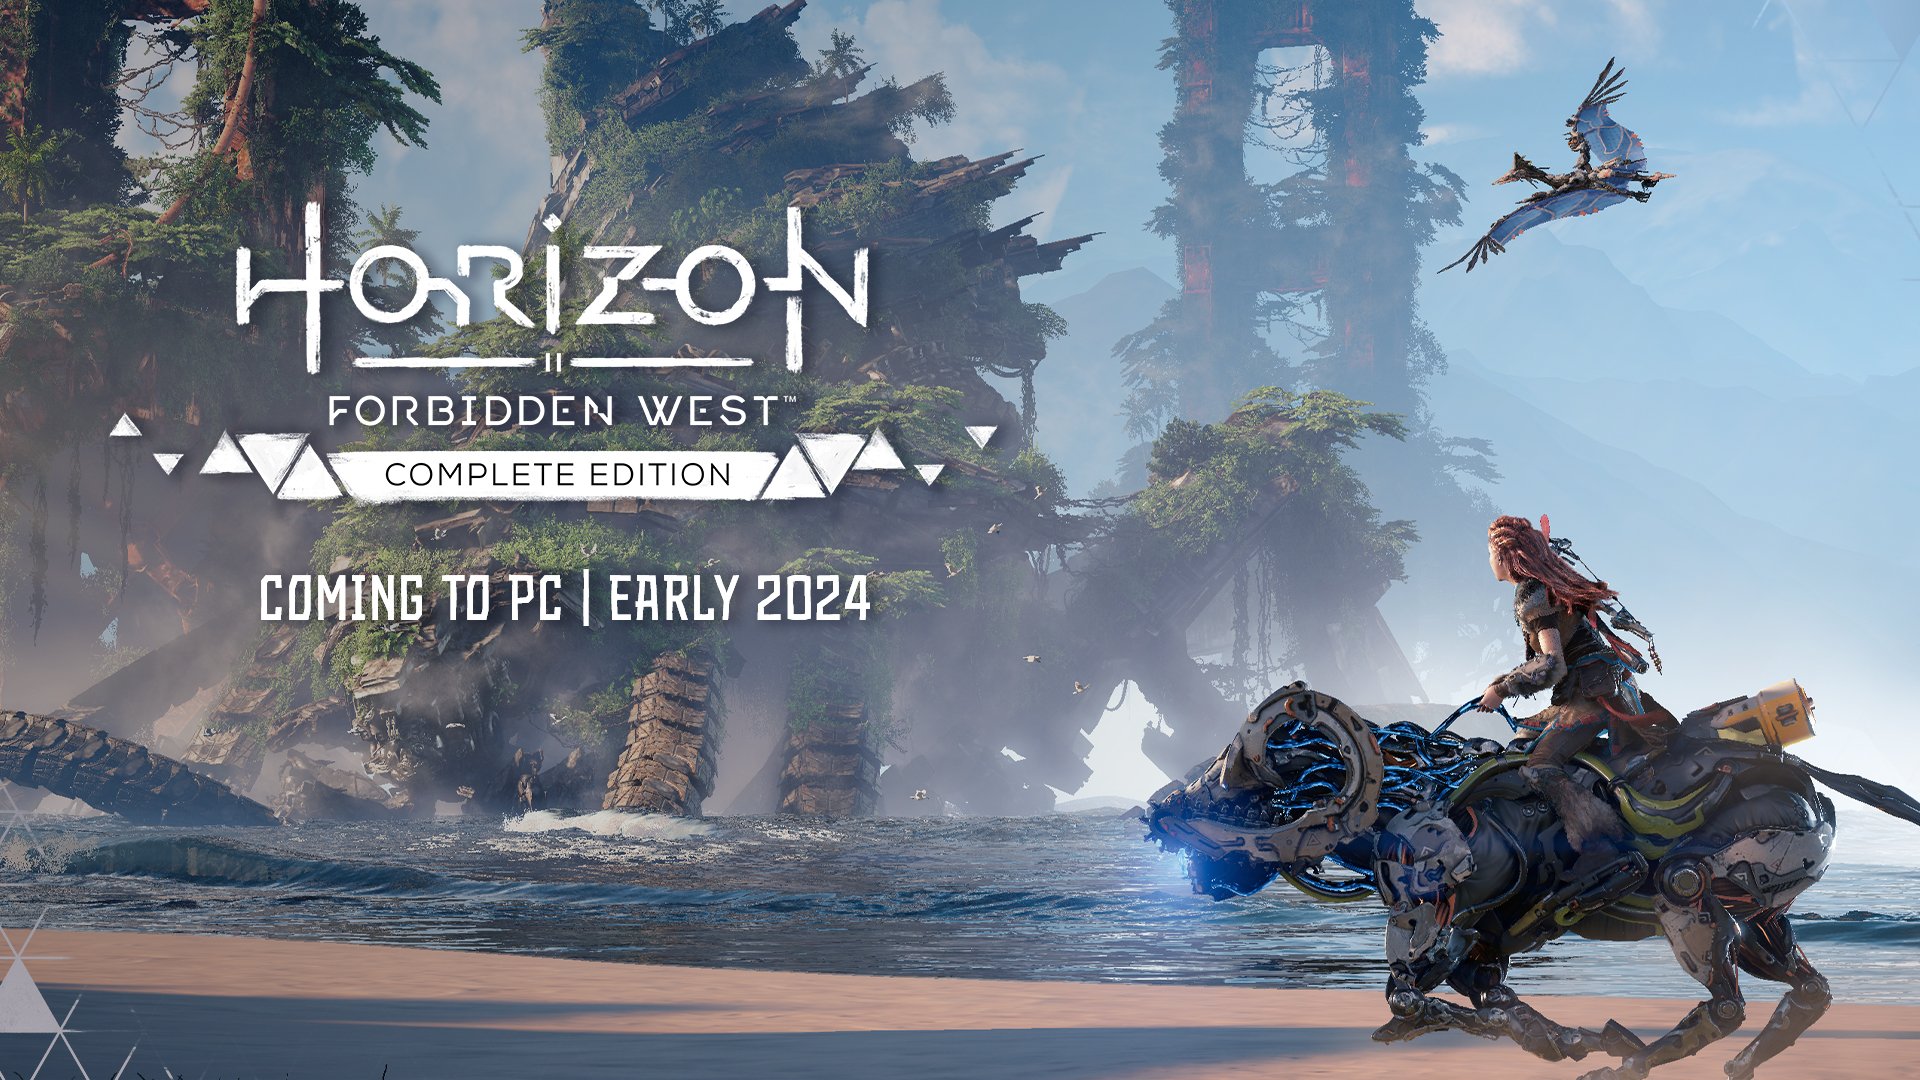 Horizon Forbidden West On PC Confirmed: Complete Edition…